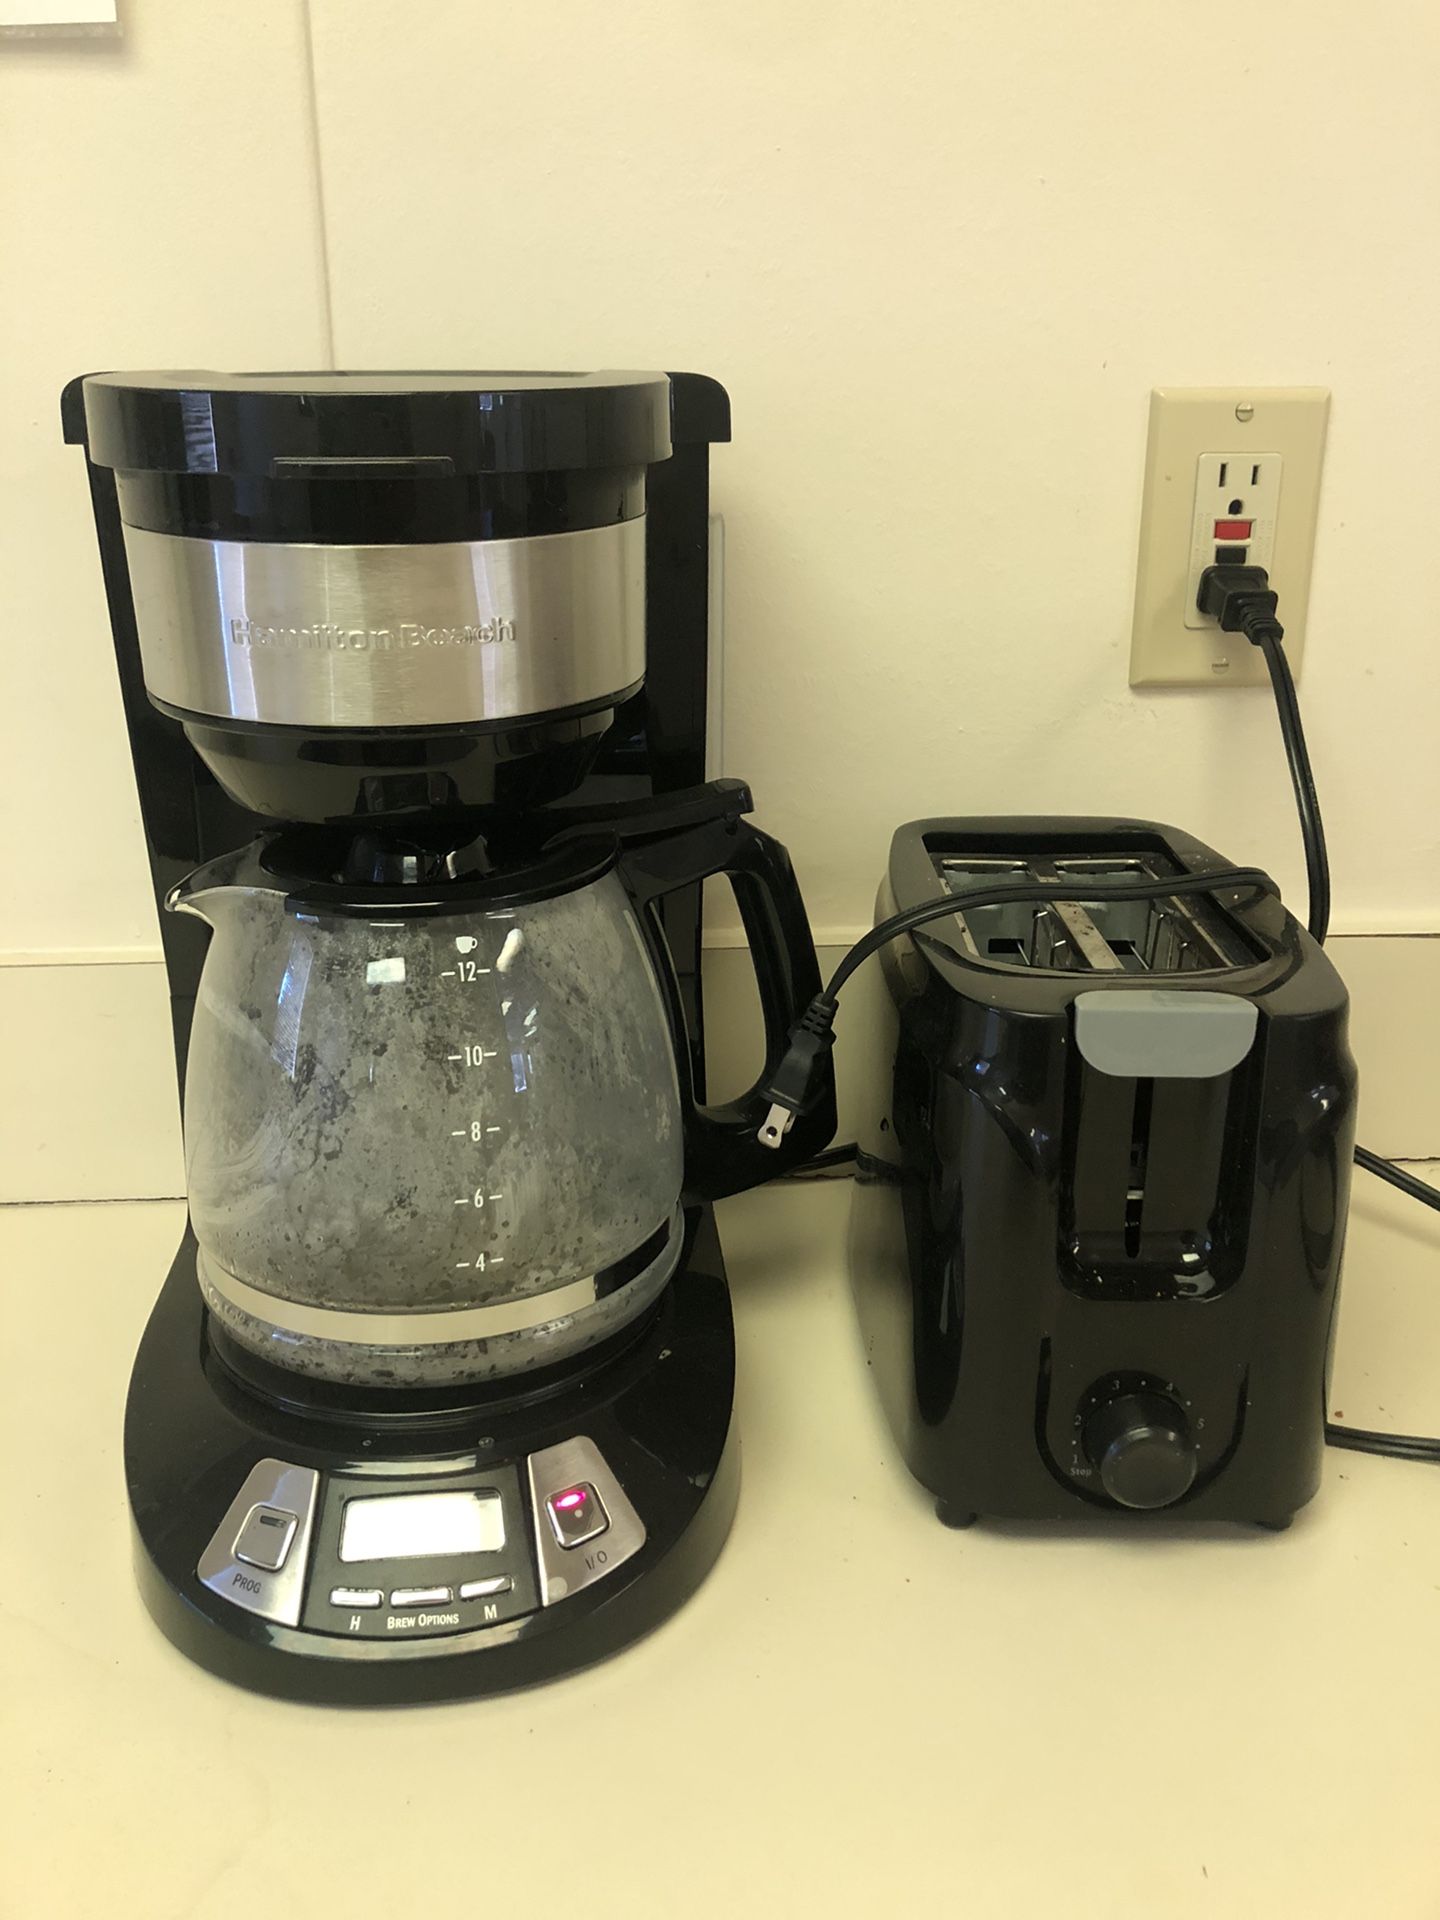 Cofffee maker and toaster